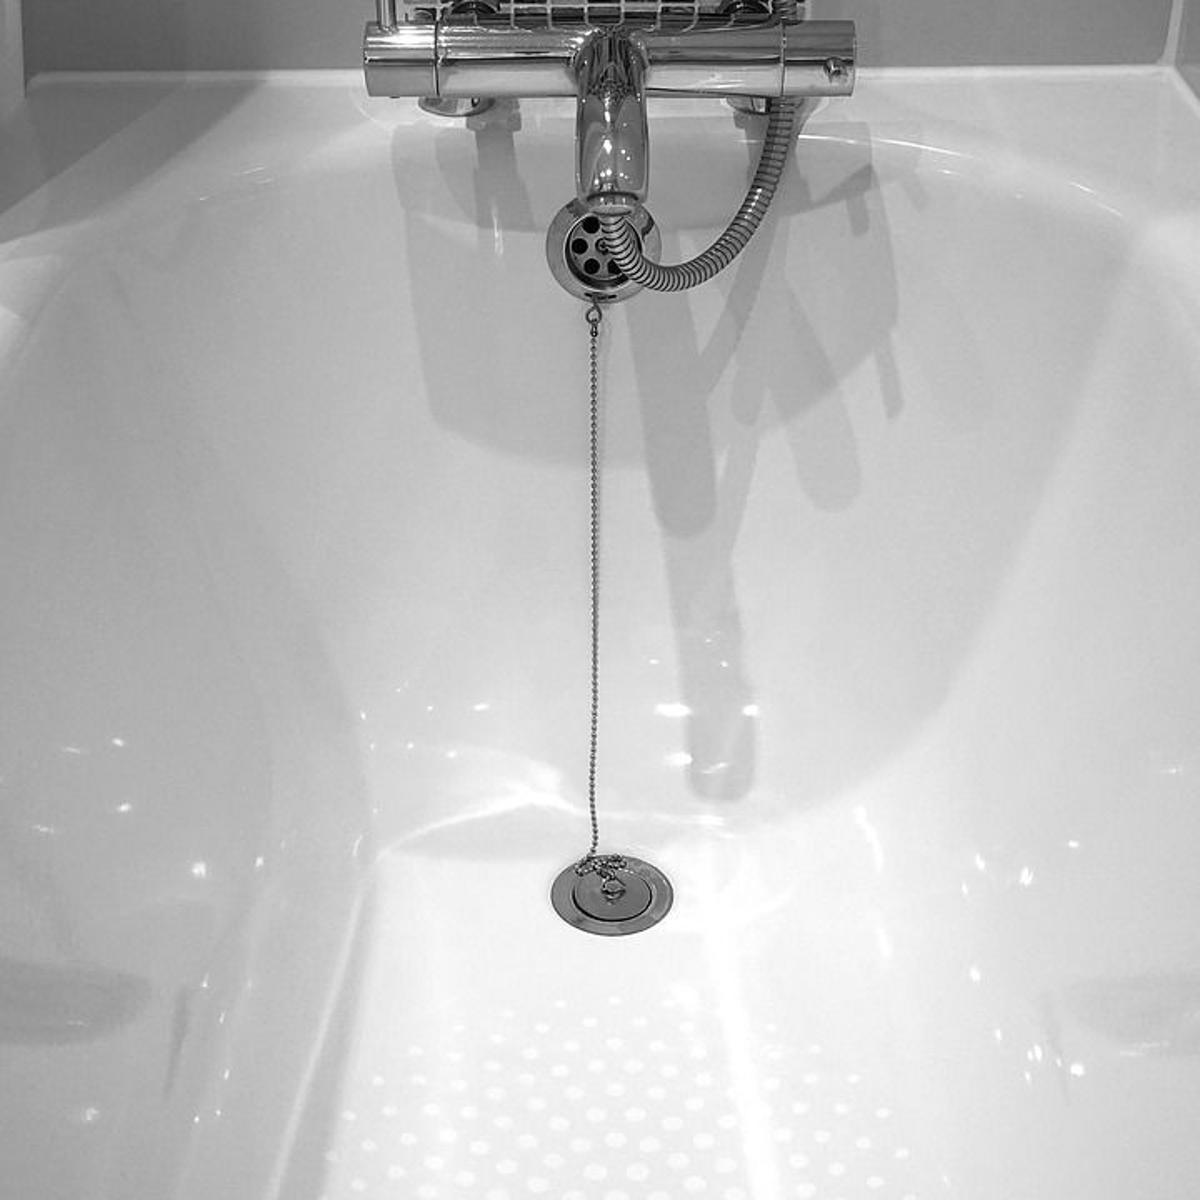 3 Caulking Secrets From The Pros Home, What Kind Of Caulking Should You Use Around A Bathtub